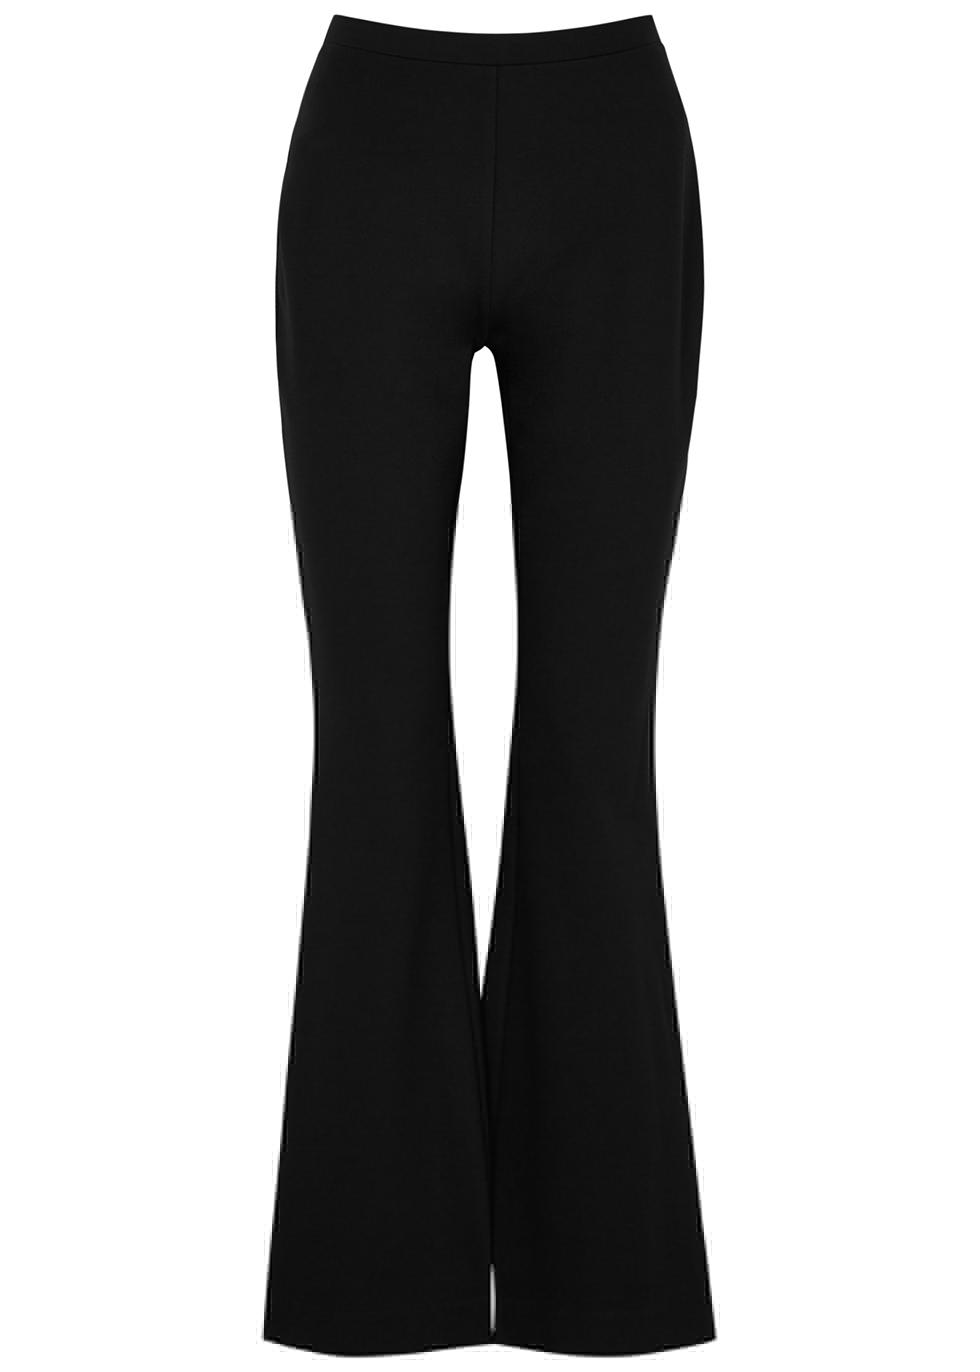 Gregory flared jersey trousers by DIANE VON FURSTENBERG